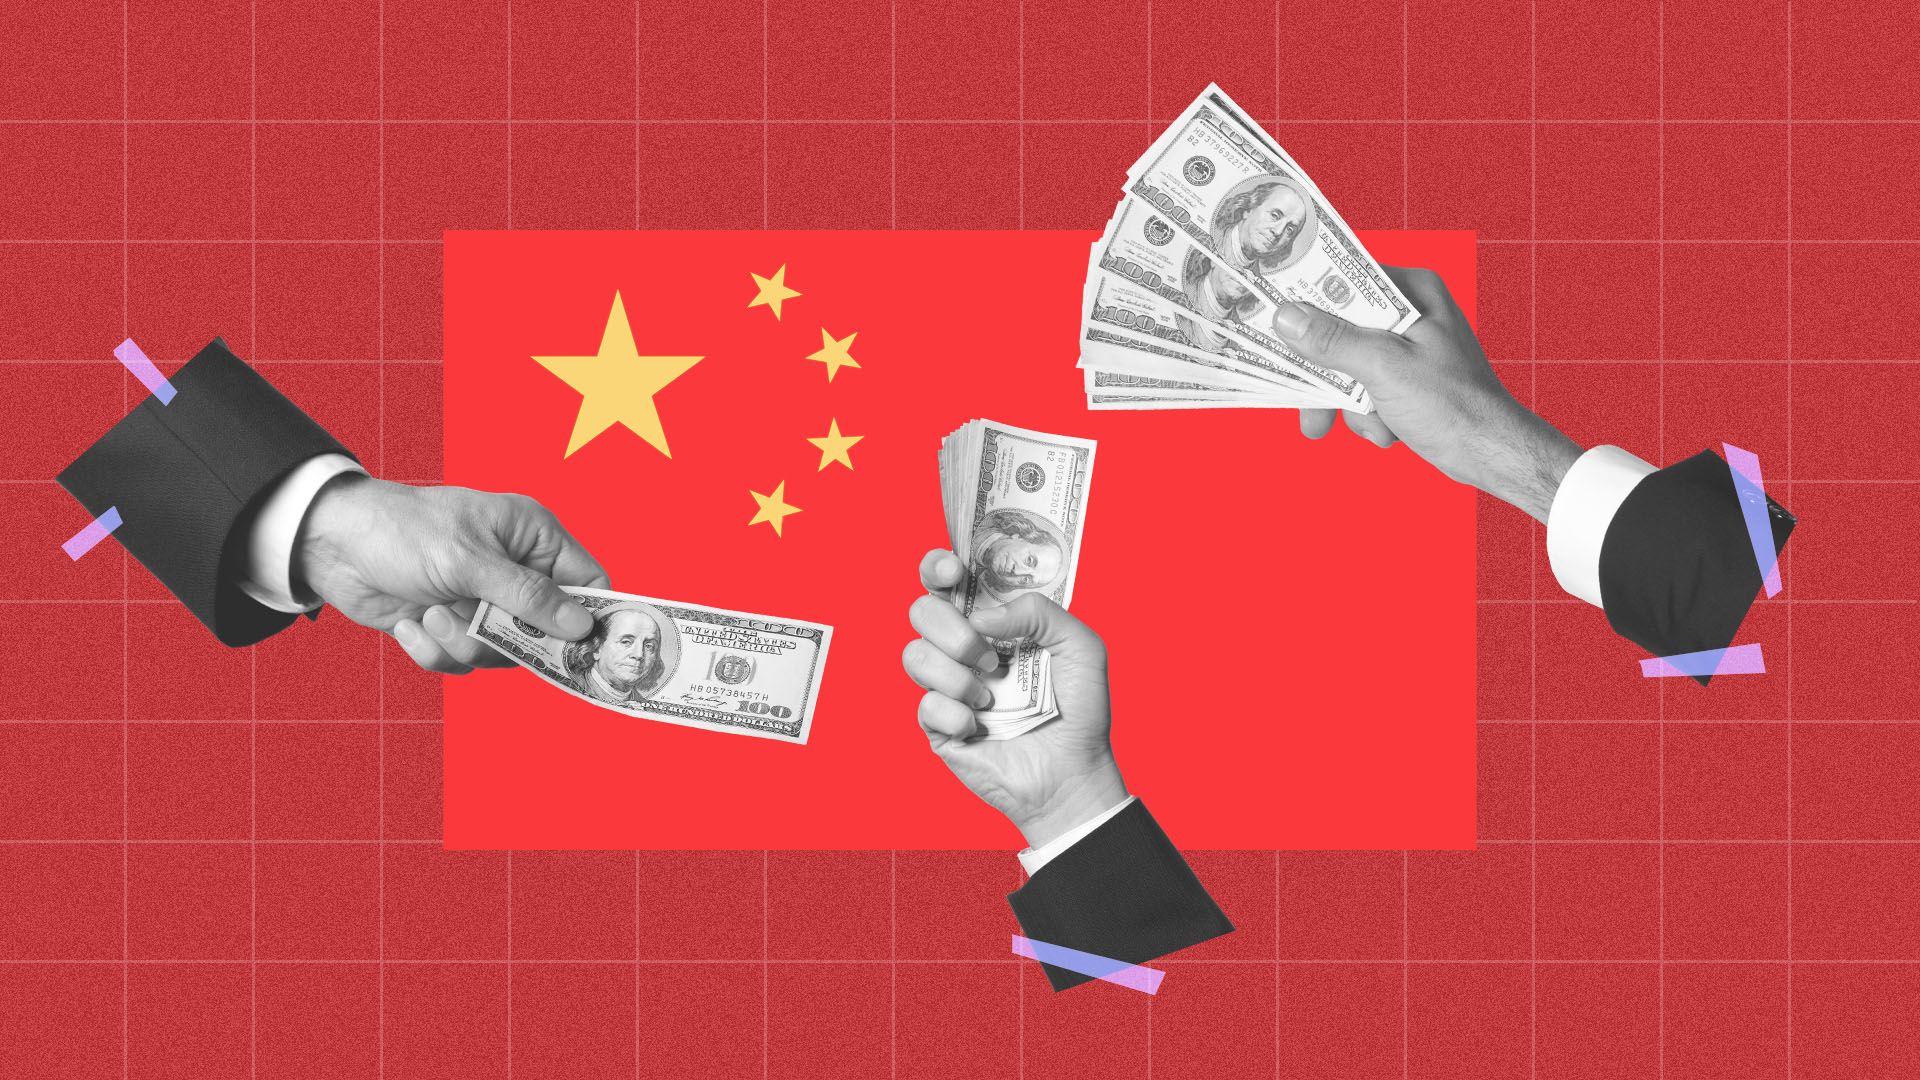 Illustration of the Chinese flag surrounded by hands reaching out with money